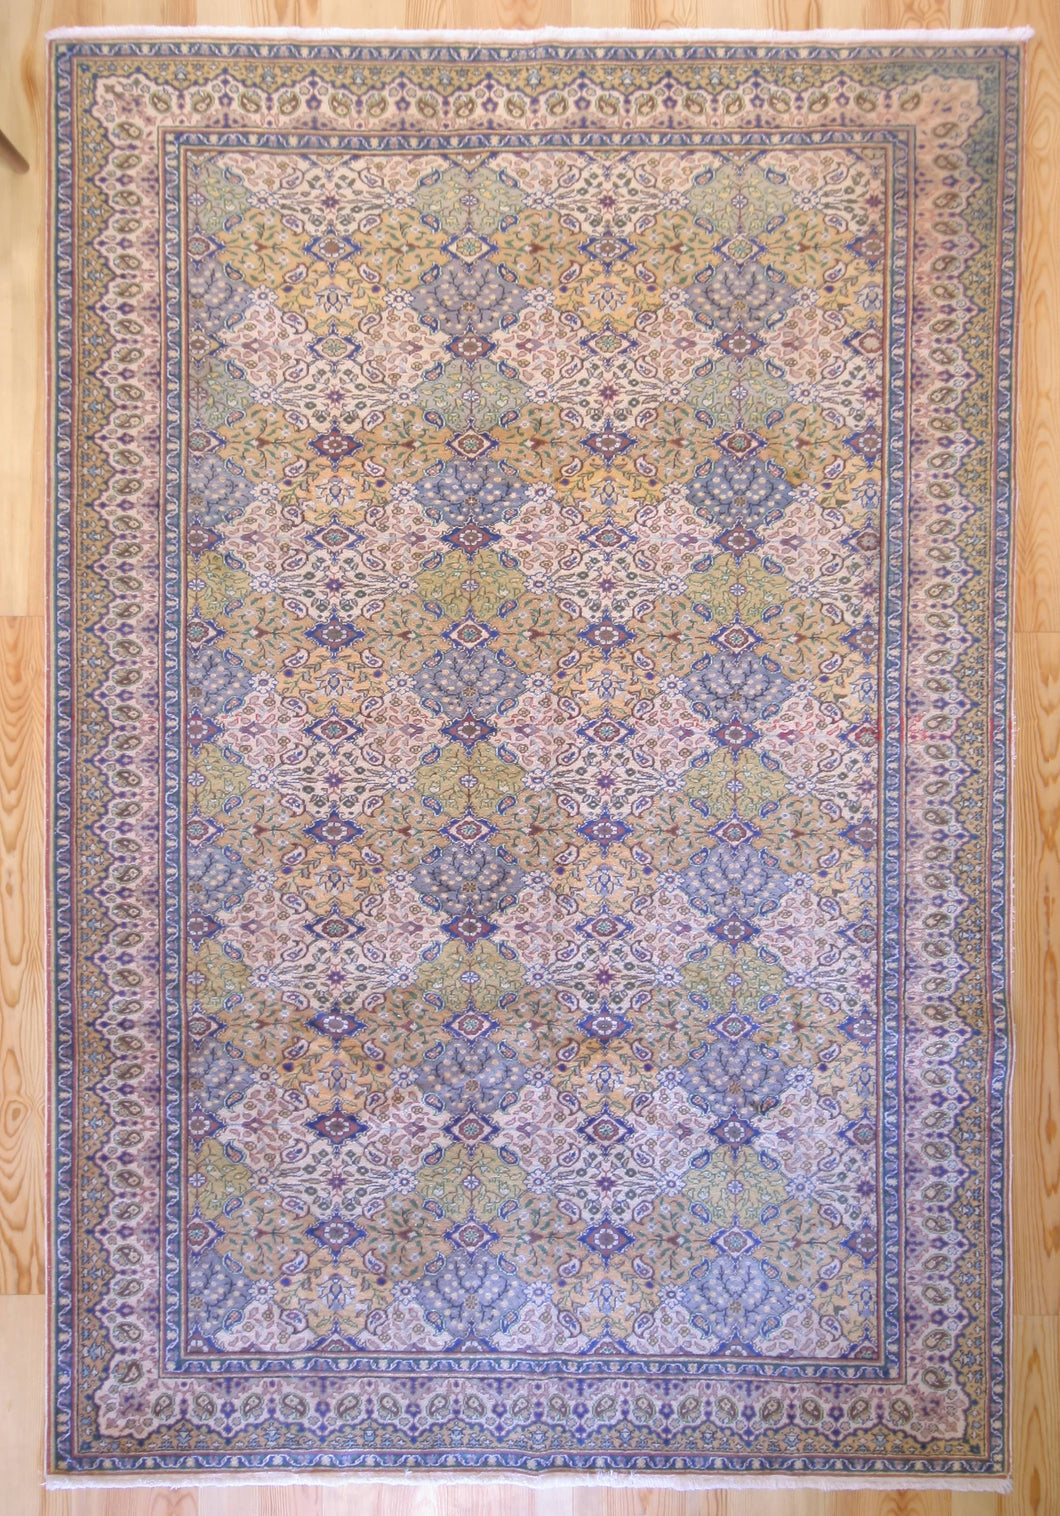 7x10 Vintage Central Anatolian 'Kayseri' Turkish Area Rug Intricate Floral Design in Alternating Colors Designed in Diamond Shapes | SKU 543